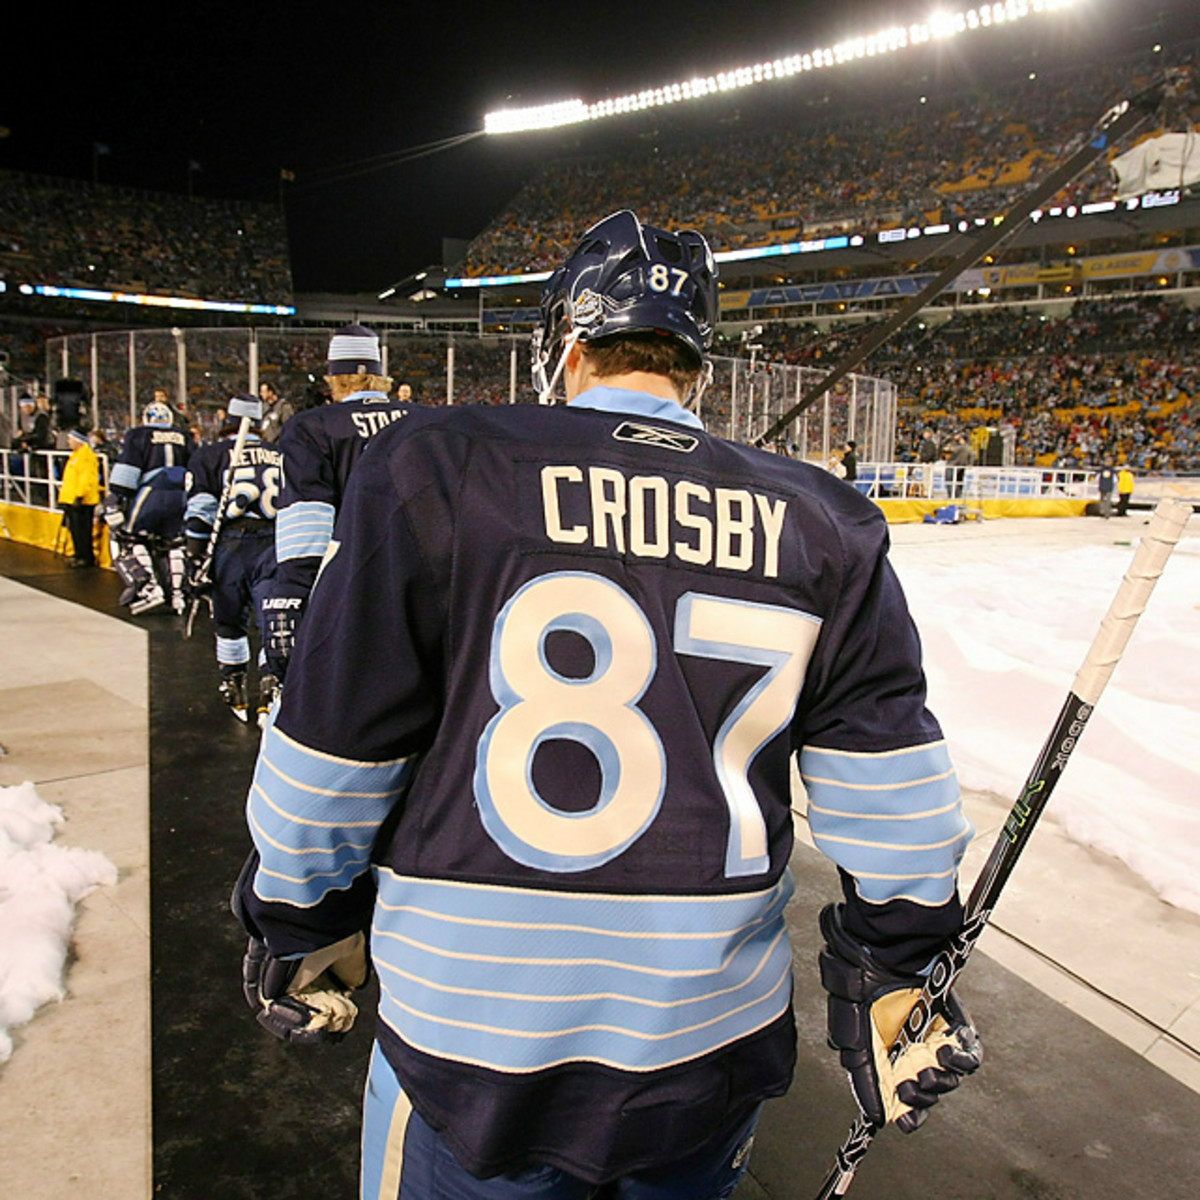 Photo Gallery: The 2011 NHL Winter Classic in pictures